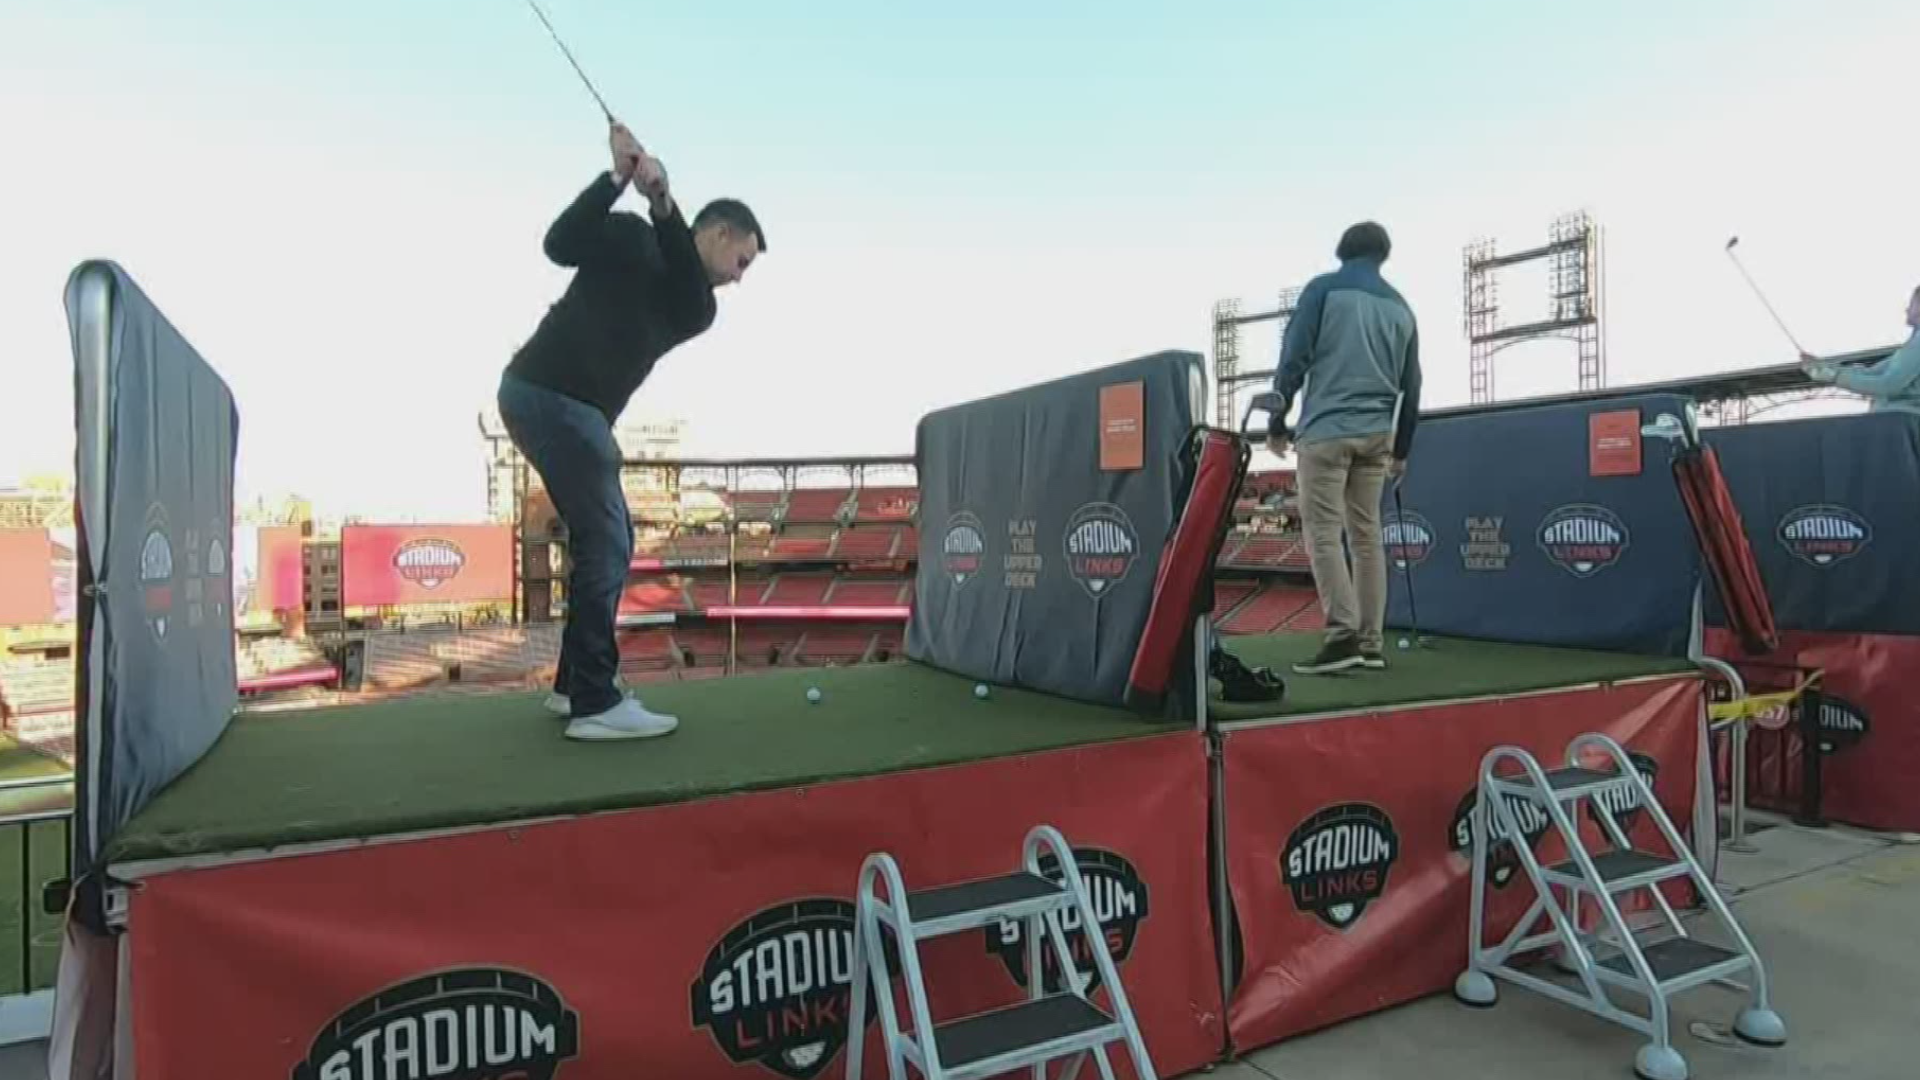 For the first time, a company has set up a nine-hole golf course throughout Busch Stadium. More than 5,000 golfers get to check it out this weekend.